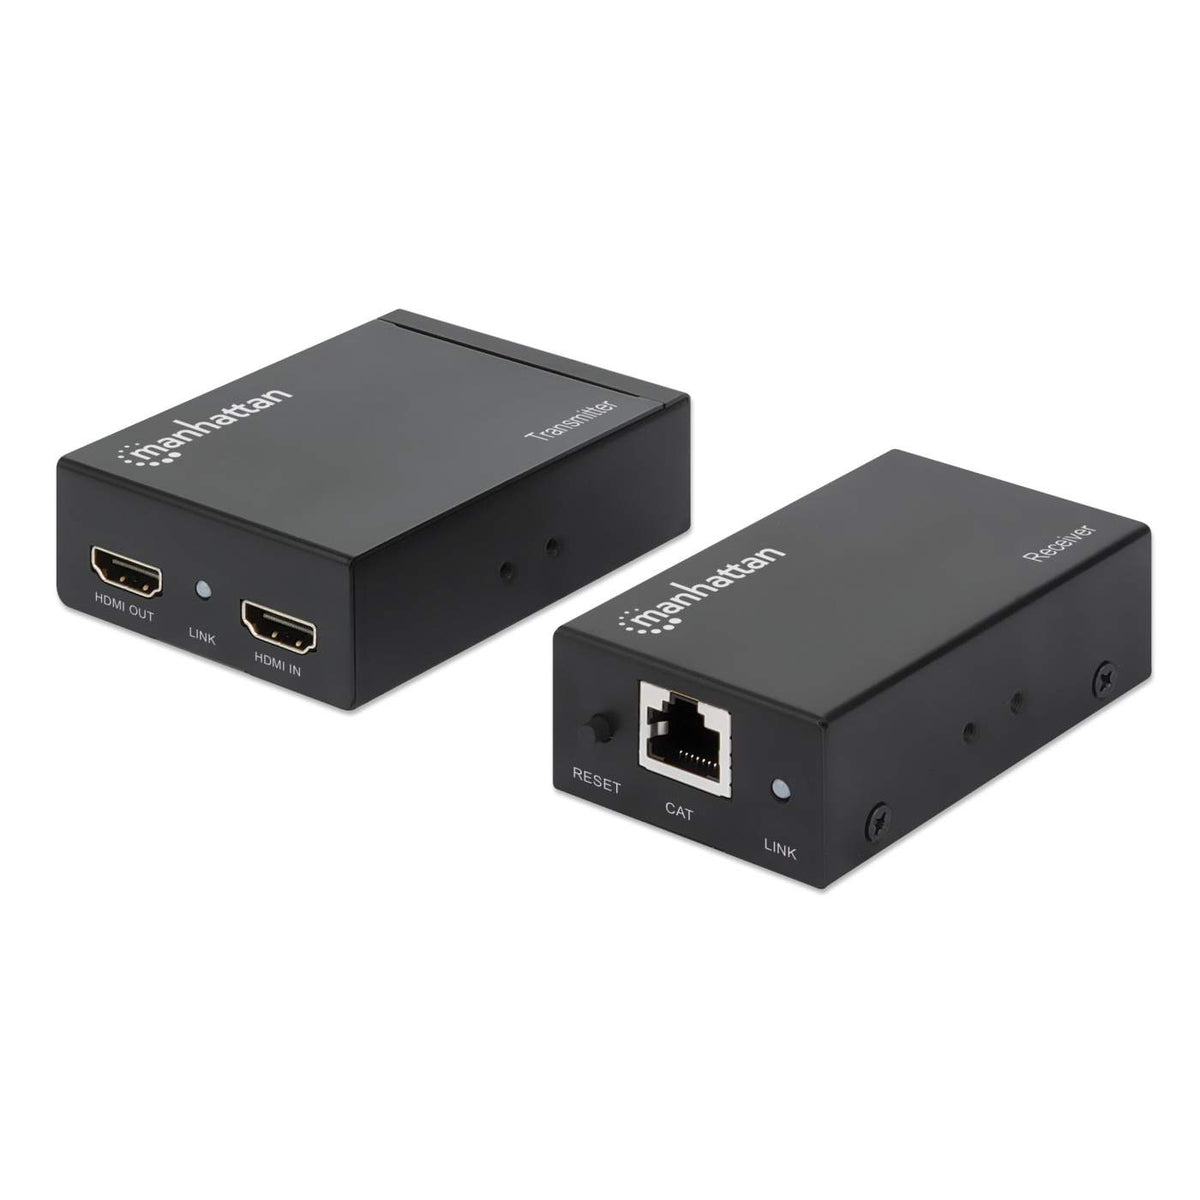 Westers abstract Lima Manhattan 1080p HDMI over Ethernet Extender Kit (207584)